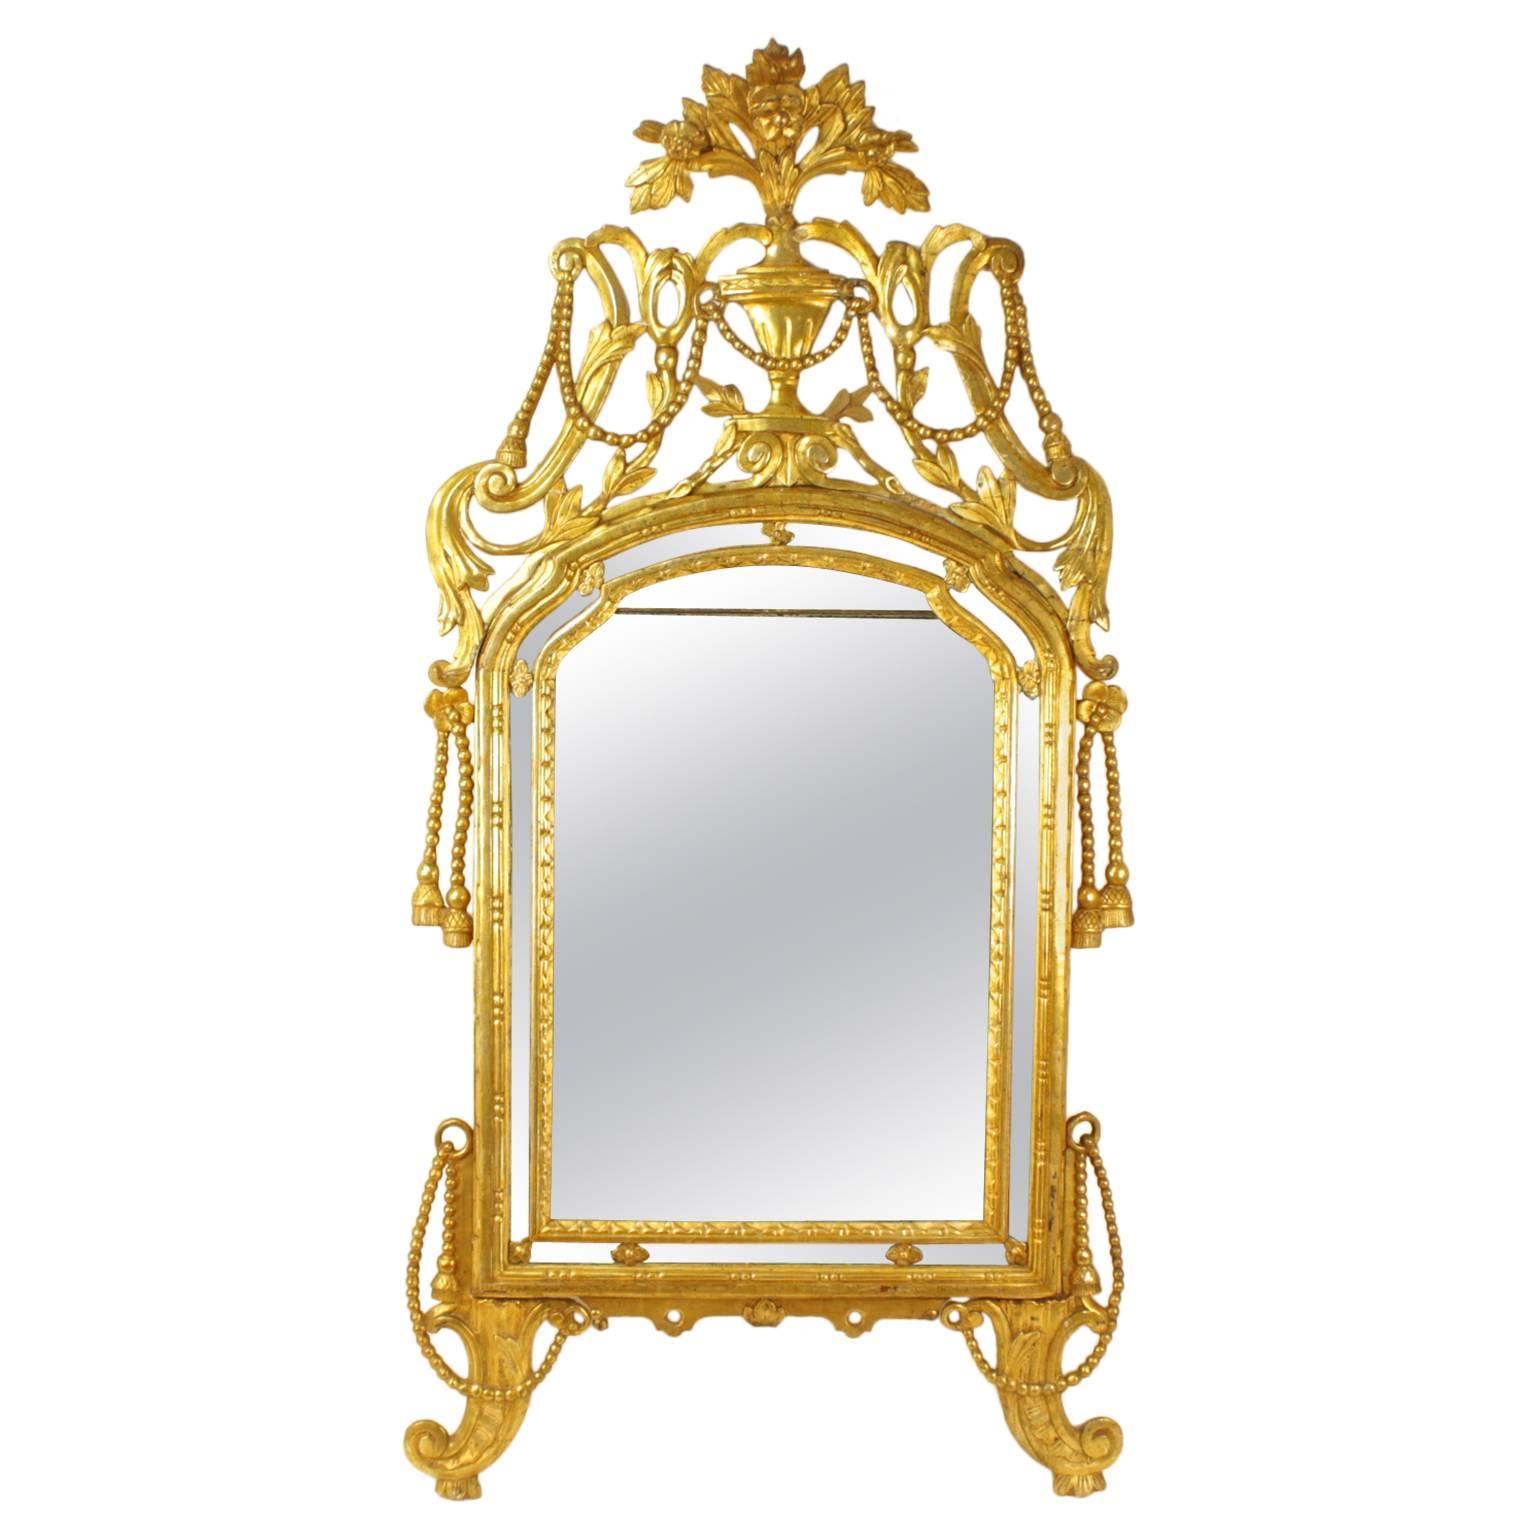 Large 18th Century Italian Rope & Tassels Decoration Carved Giltwood Mirror For Sale